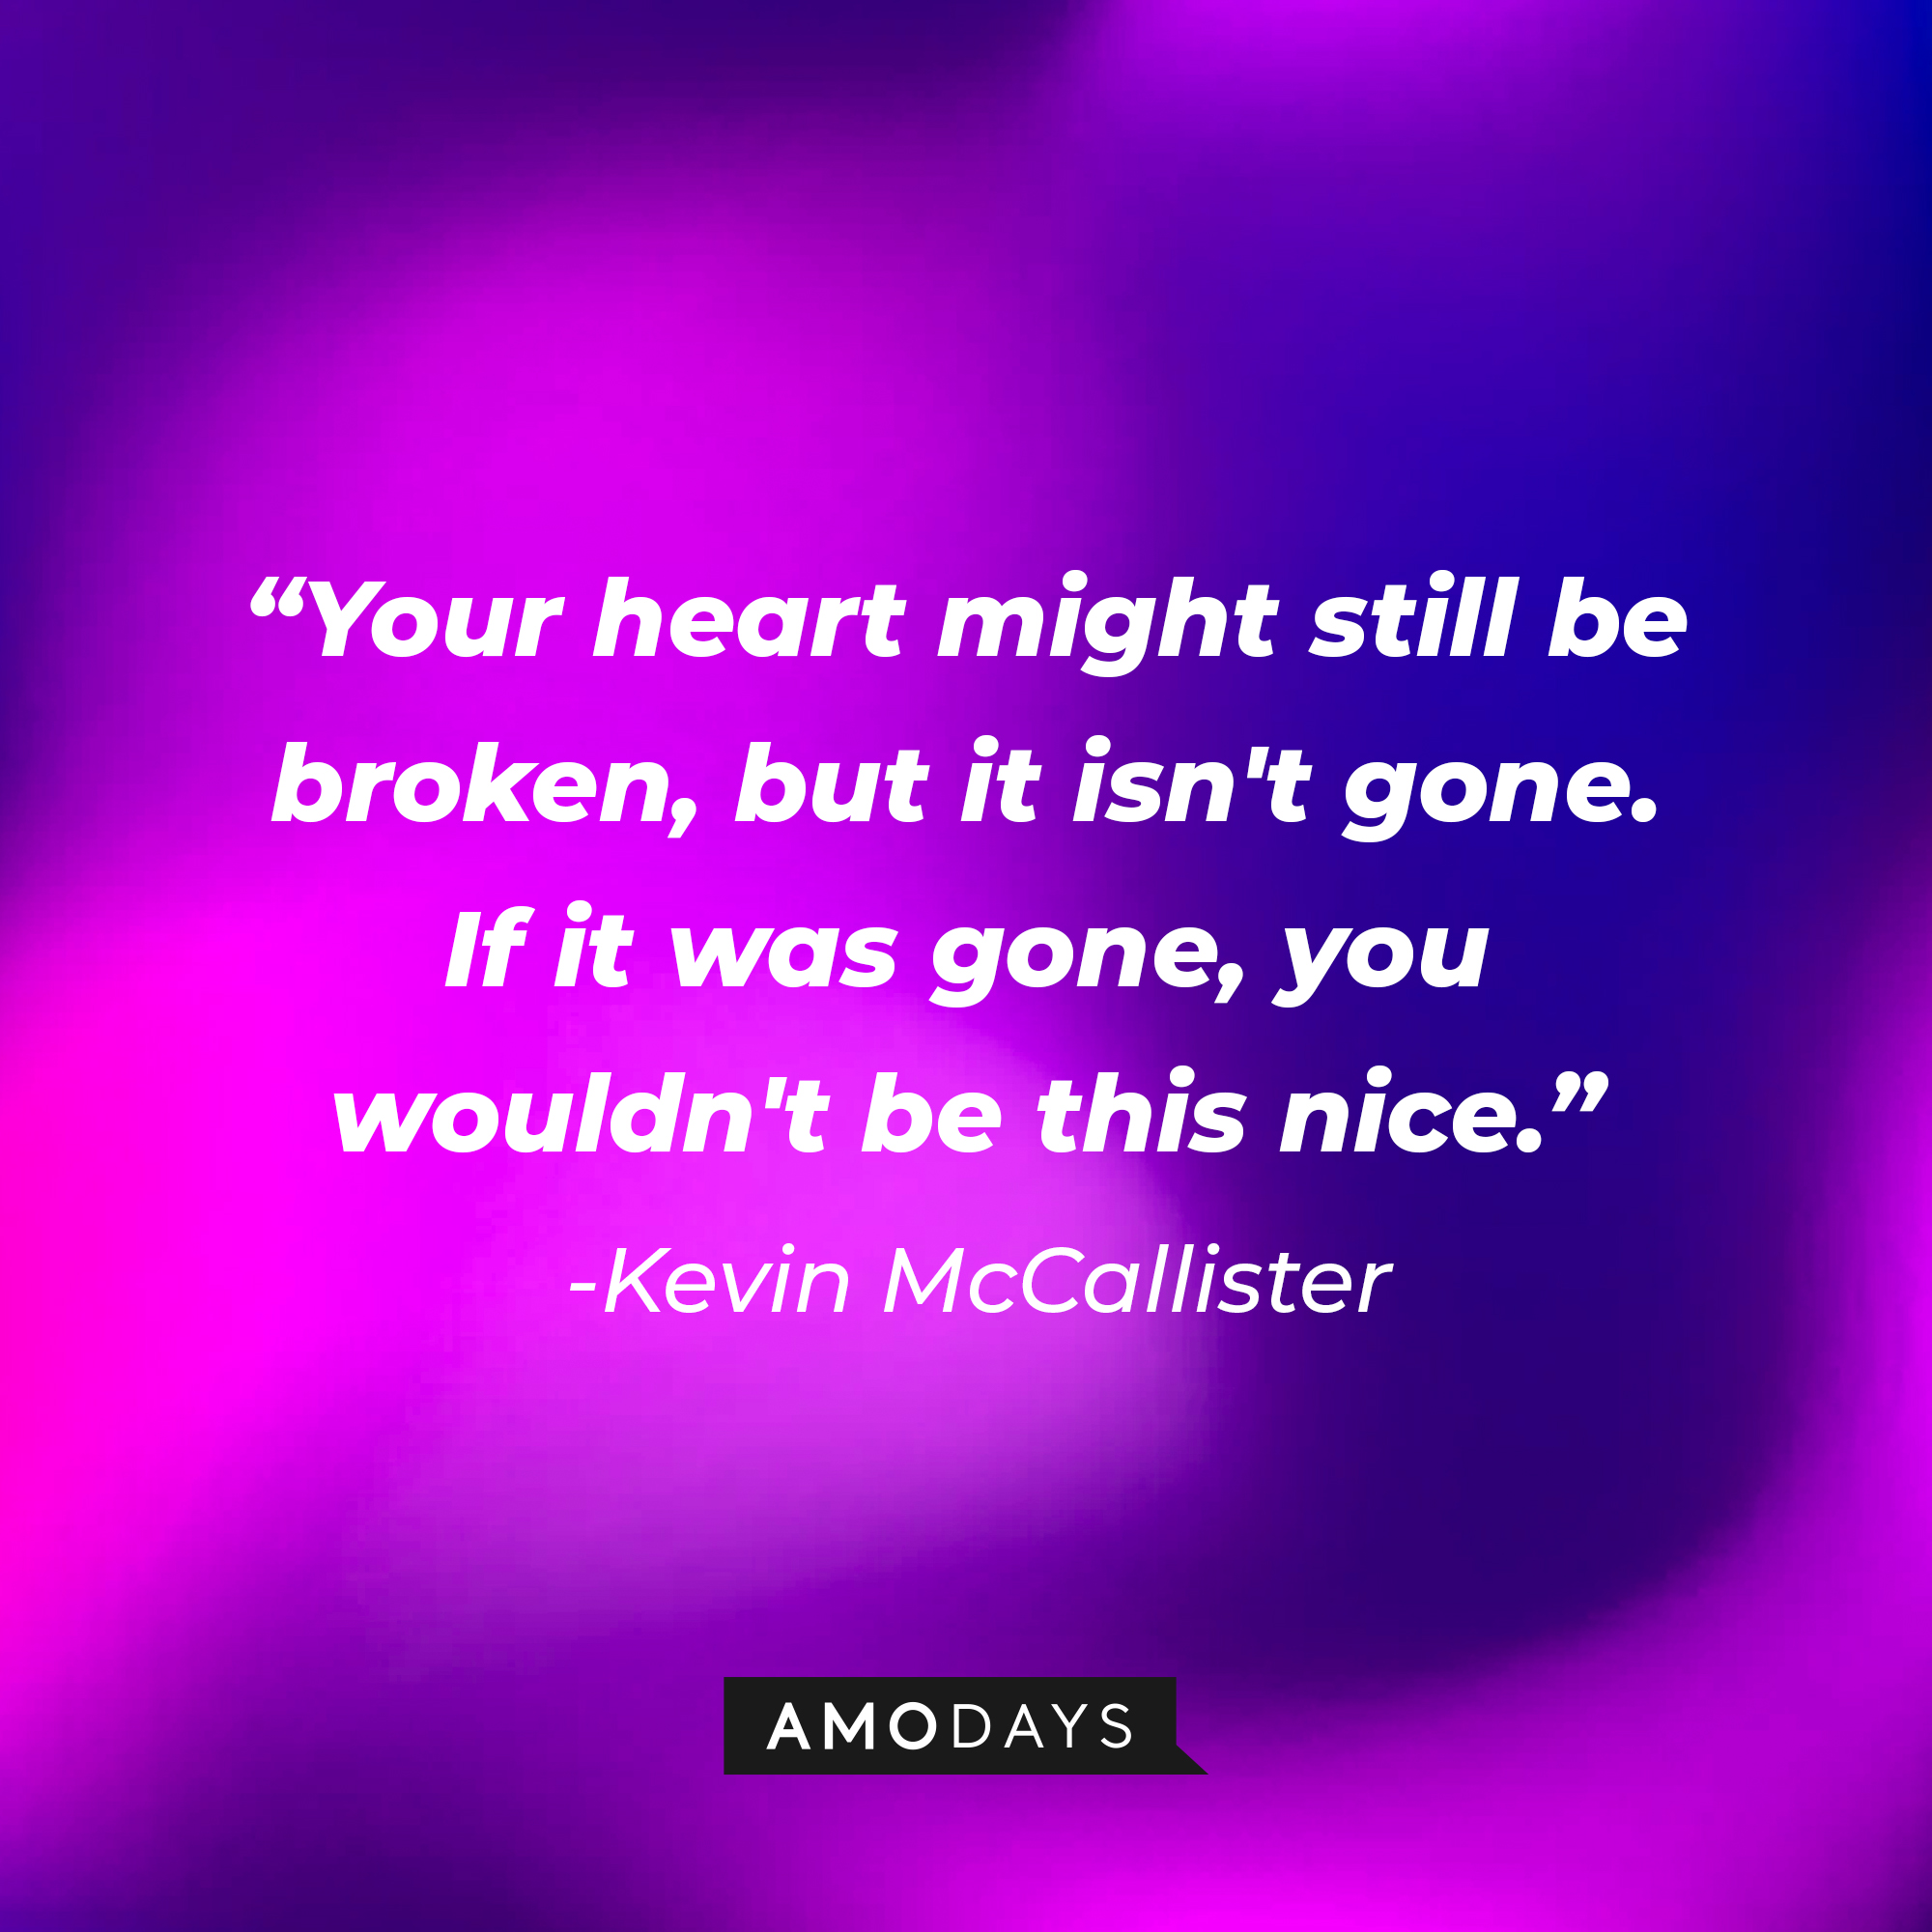 Kevin McCallister's quote: "Your heart might still be broken, but it isn't gone. If it was gone, you wouldn't be this nice." | Source: AmoDays